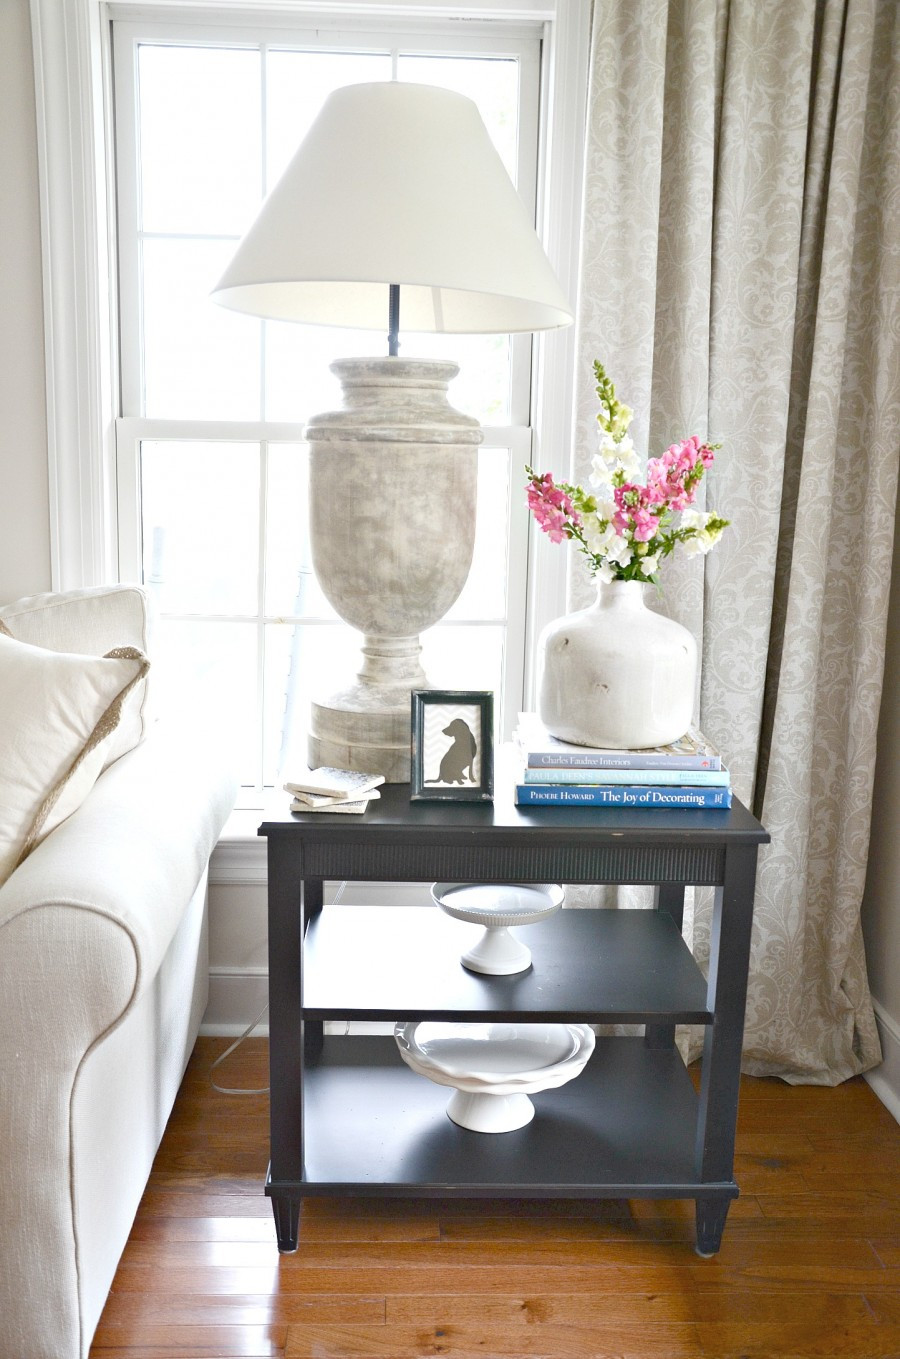 Living Room End Table
 HOW TO STYLE AN END TABLE LIKE A PRO StoneGable